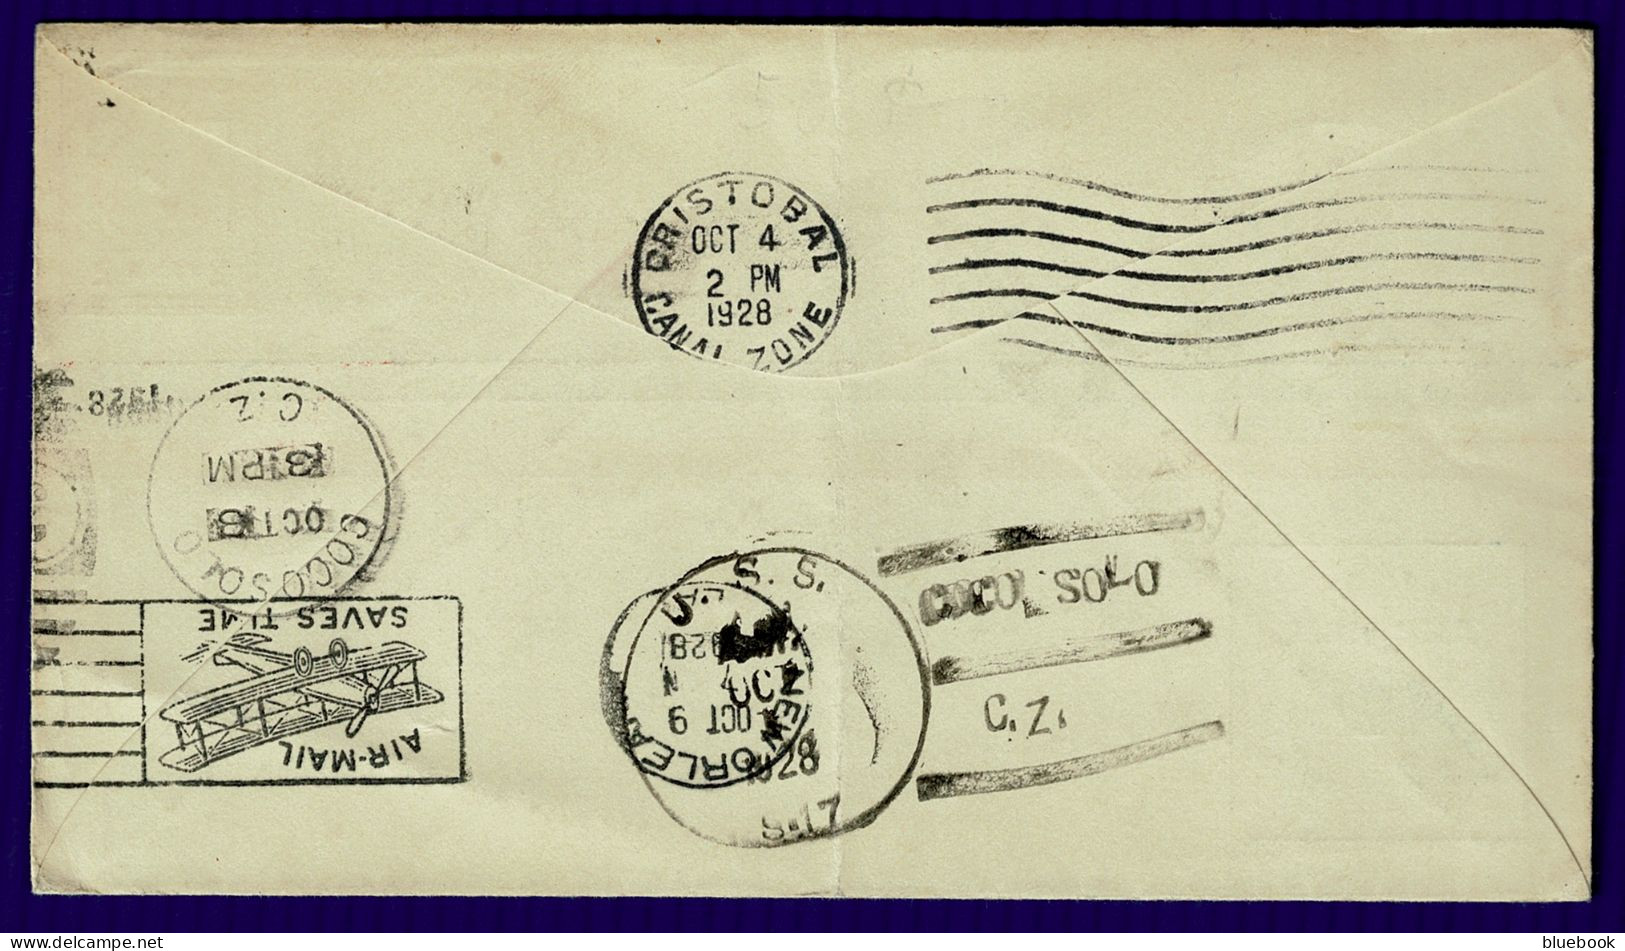 Ref 1639 - 1928 USA Canal Zone Postal Stationery Cover Uprated - Submarine U.S.S. Coco Solo - Canal Zone